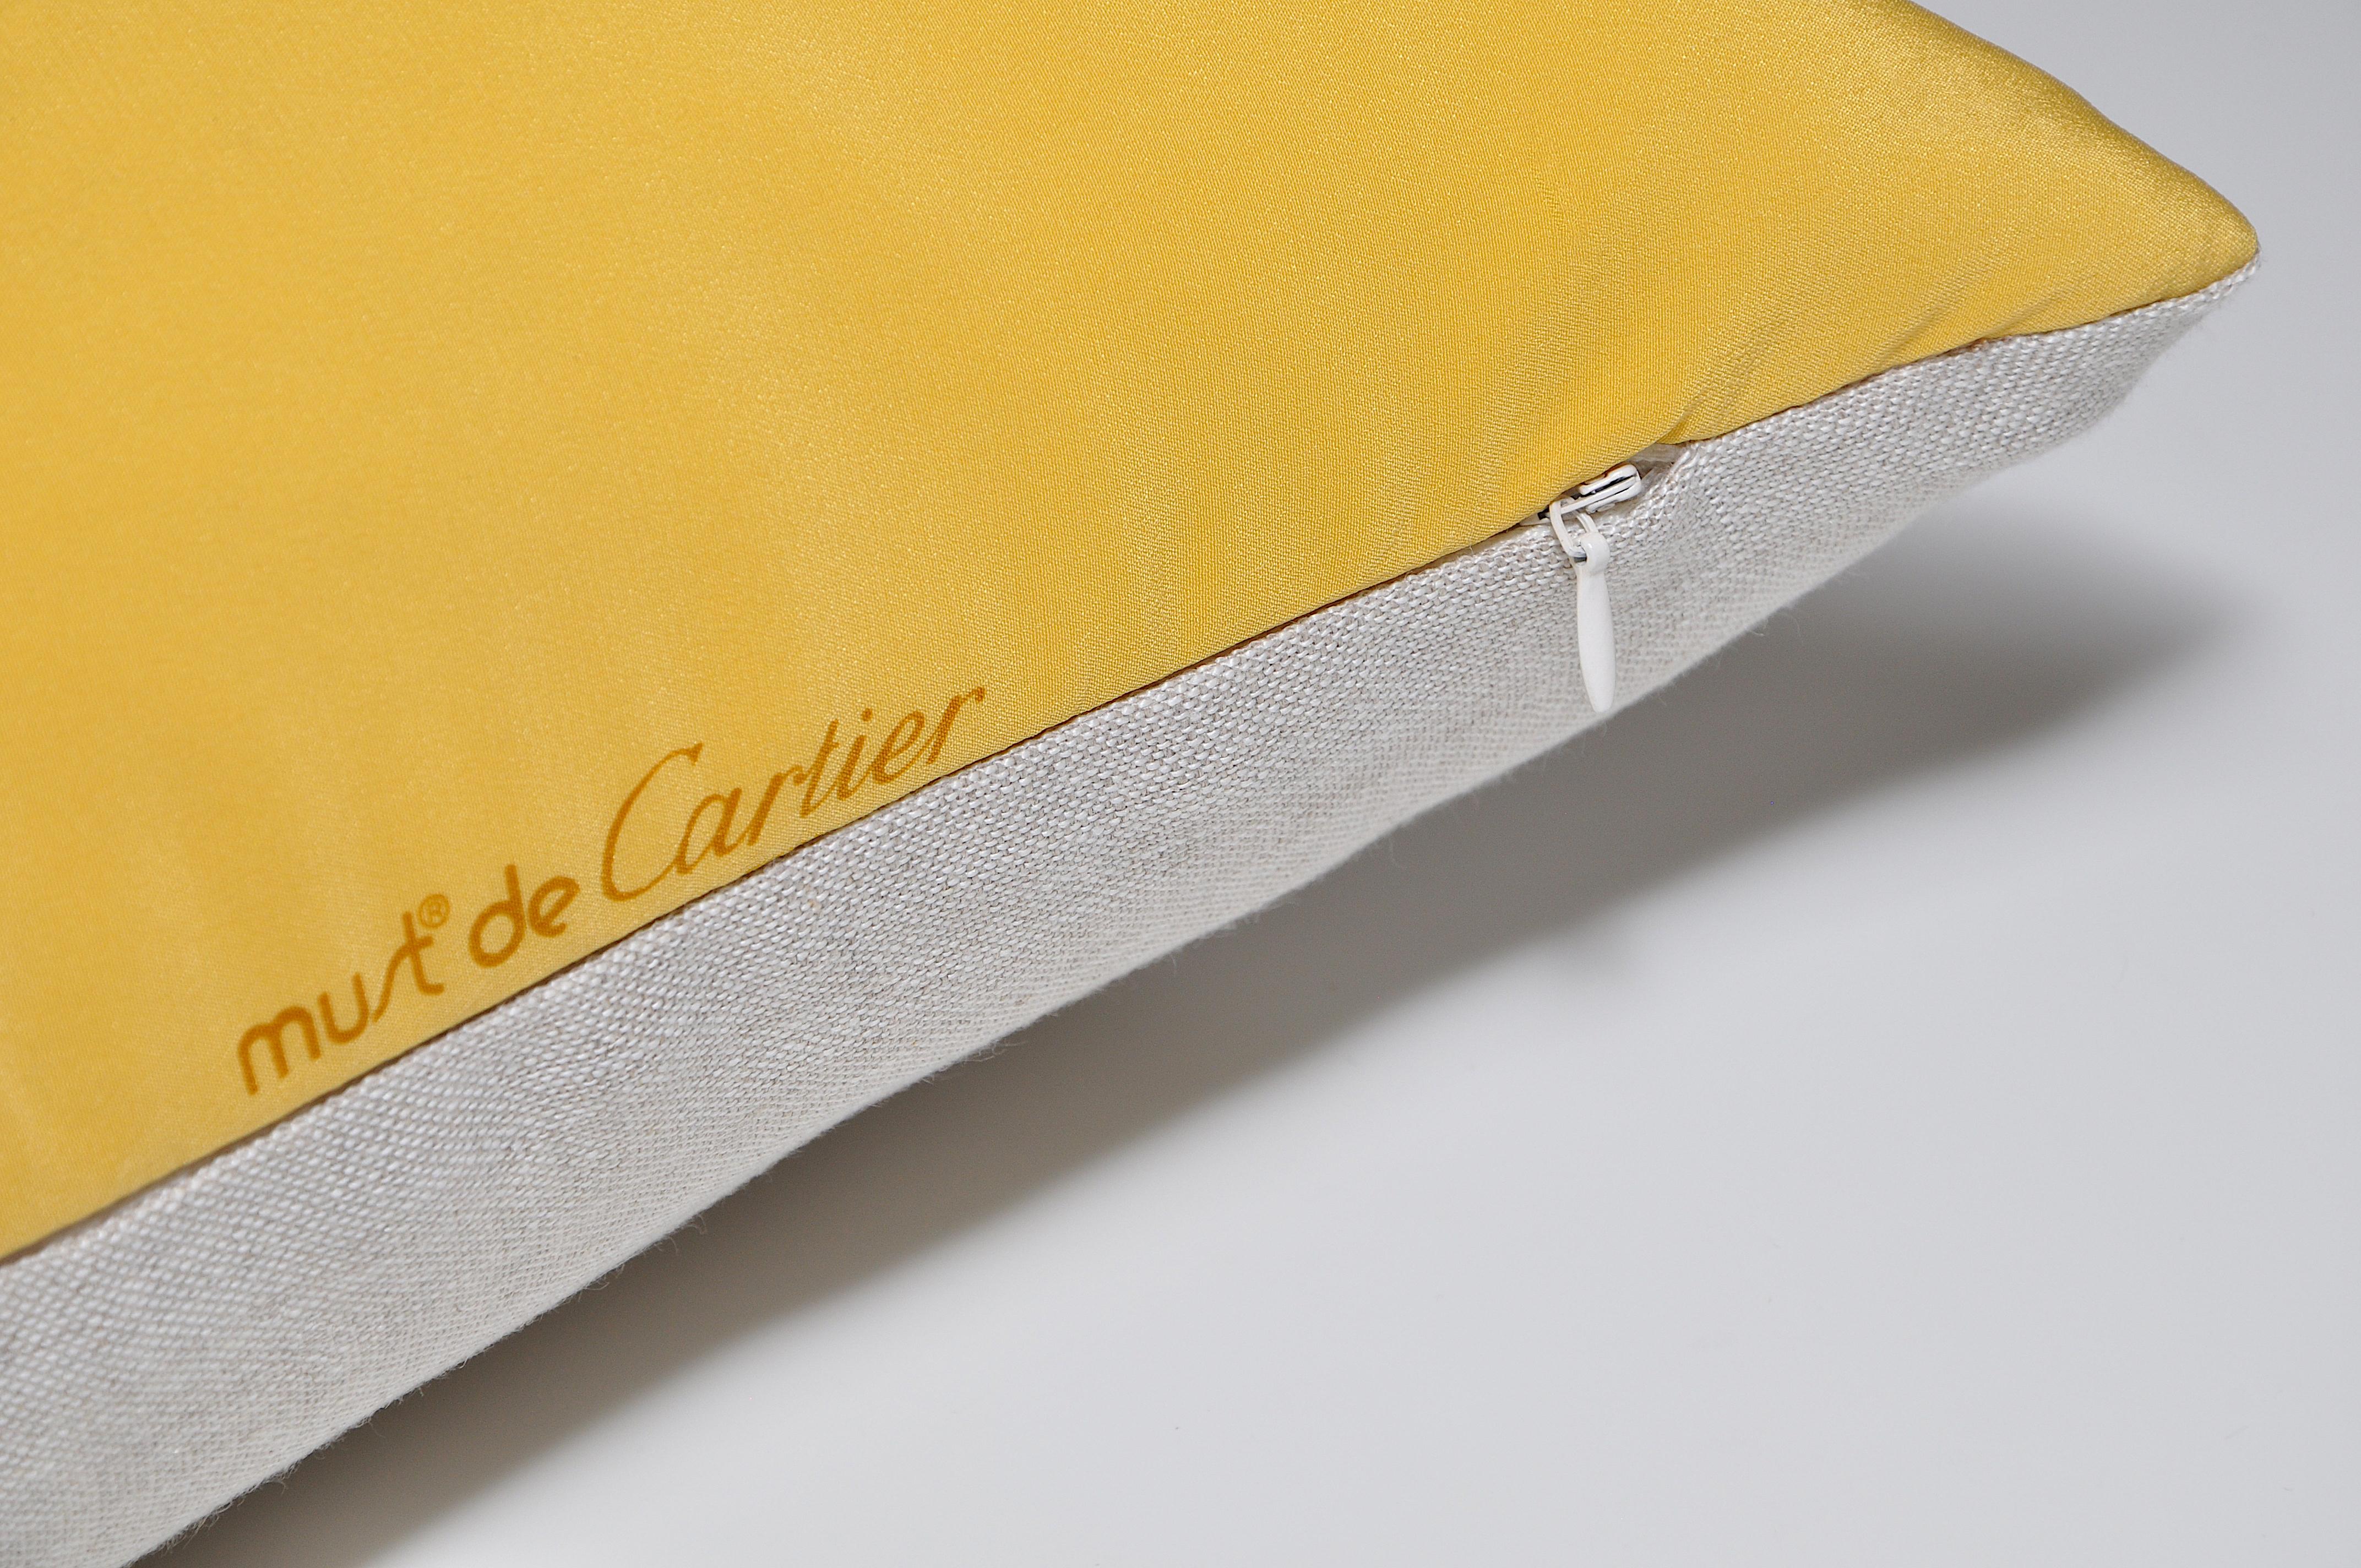 French Pair of Rare Vintage Cartier Panther Bracelet Silk Scarf Yellow Linen Pillow For Sale